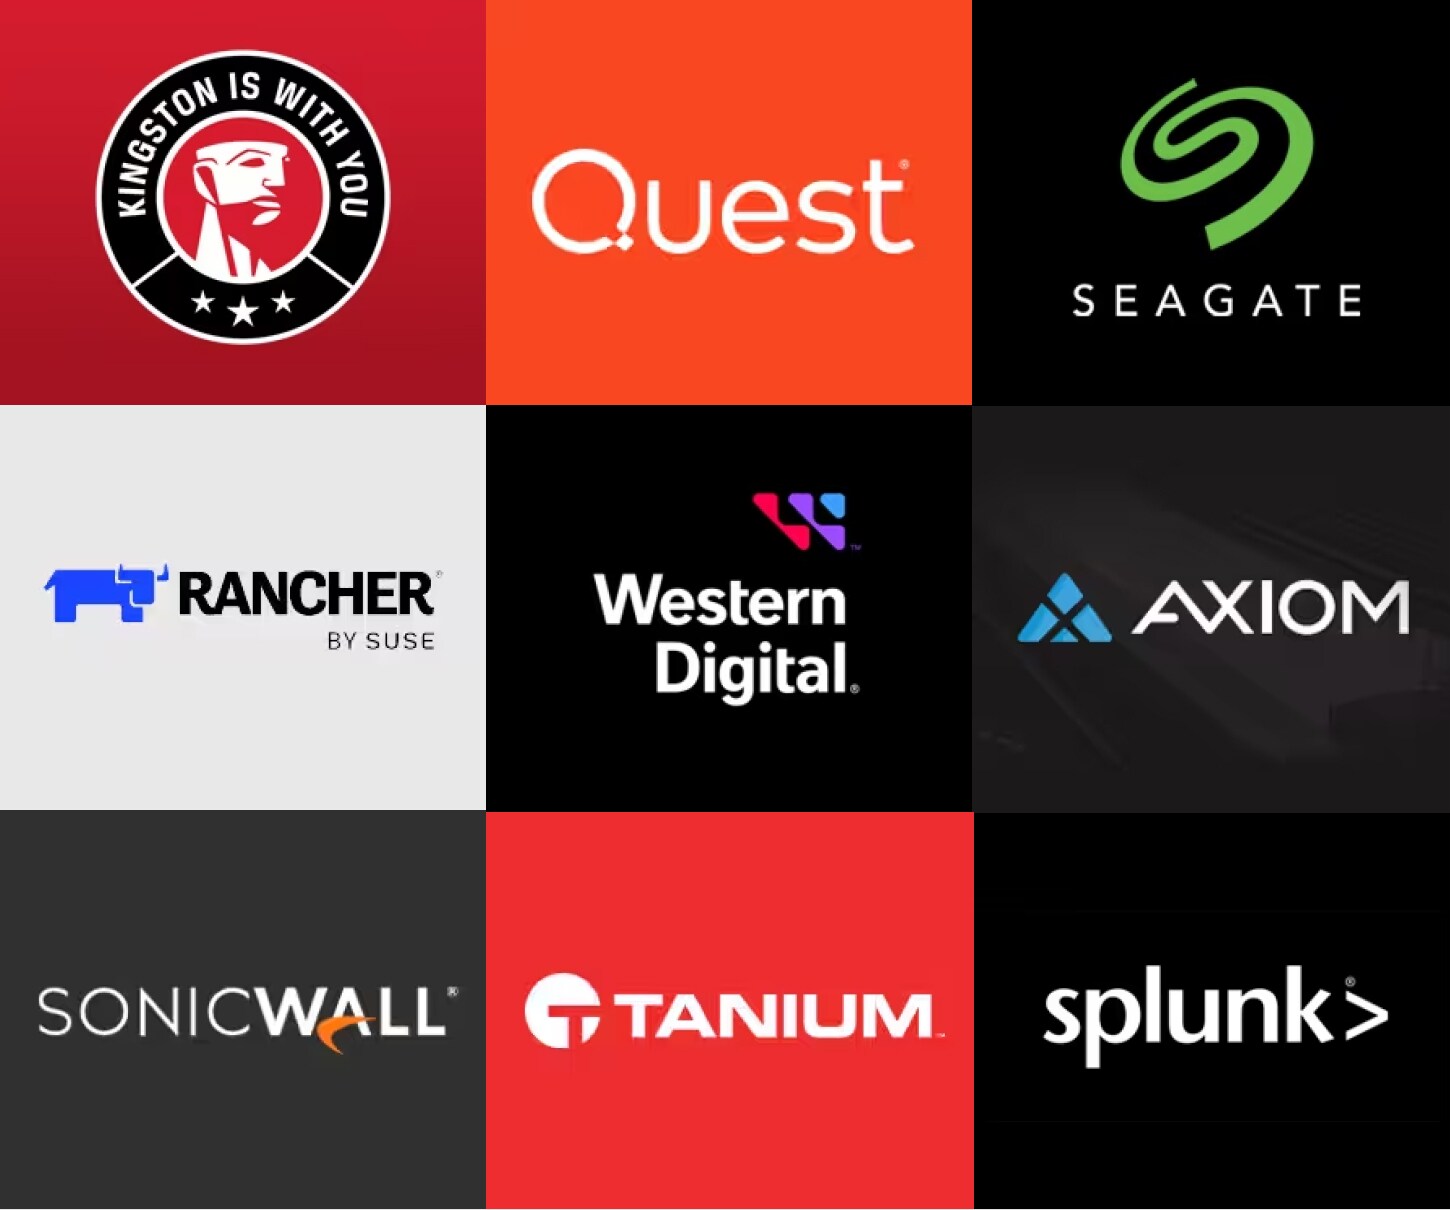 Image showing logos of all the companies here